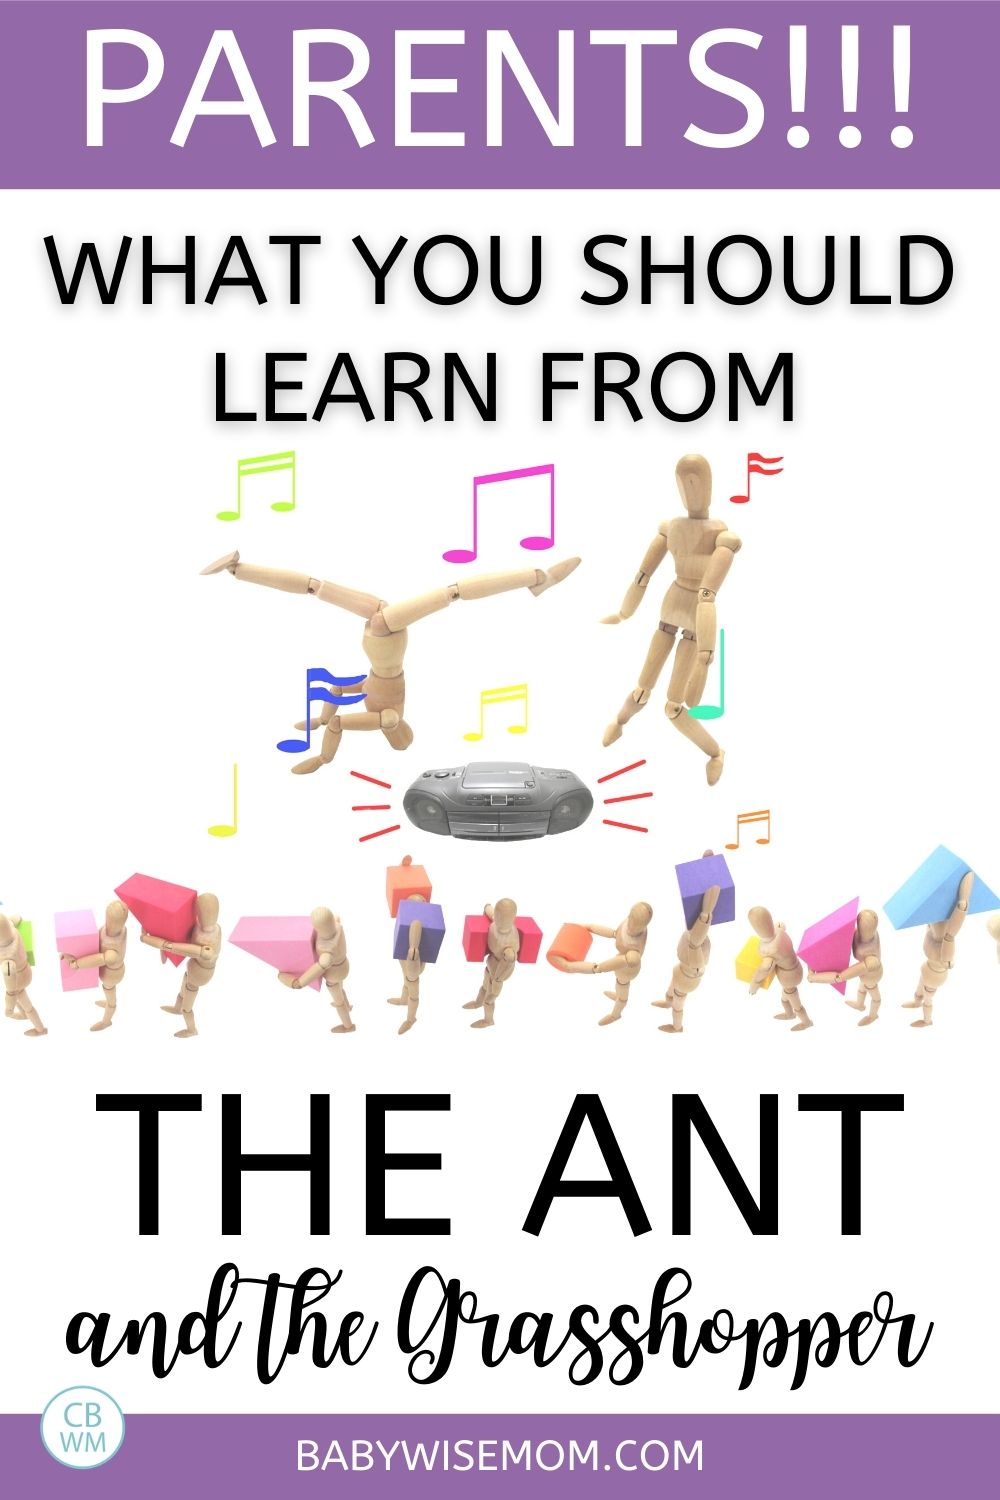 What parents should learn from the Ant and the Grasshopper